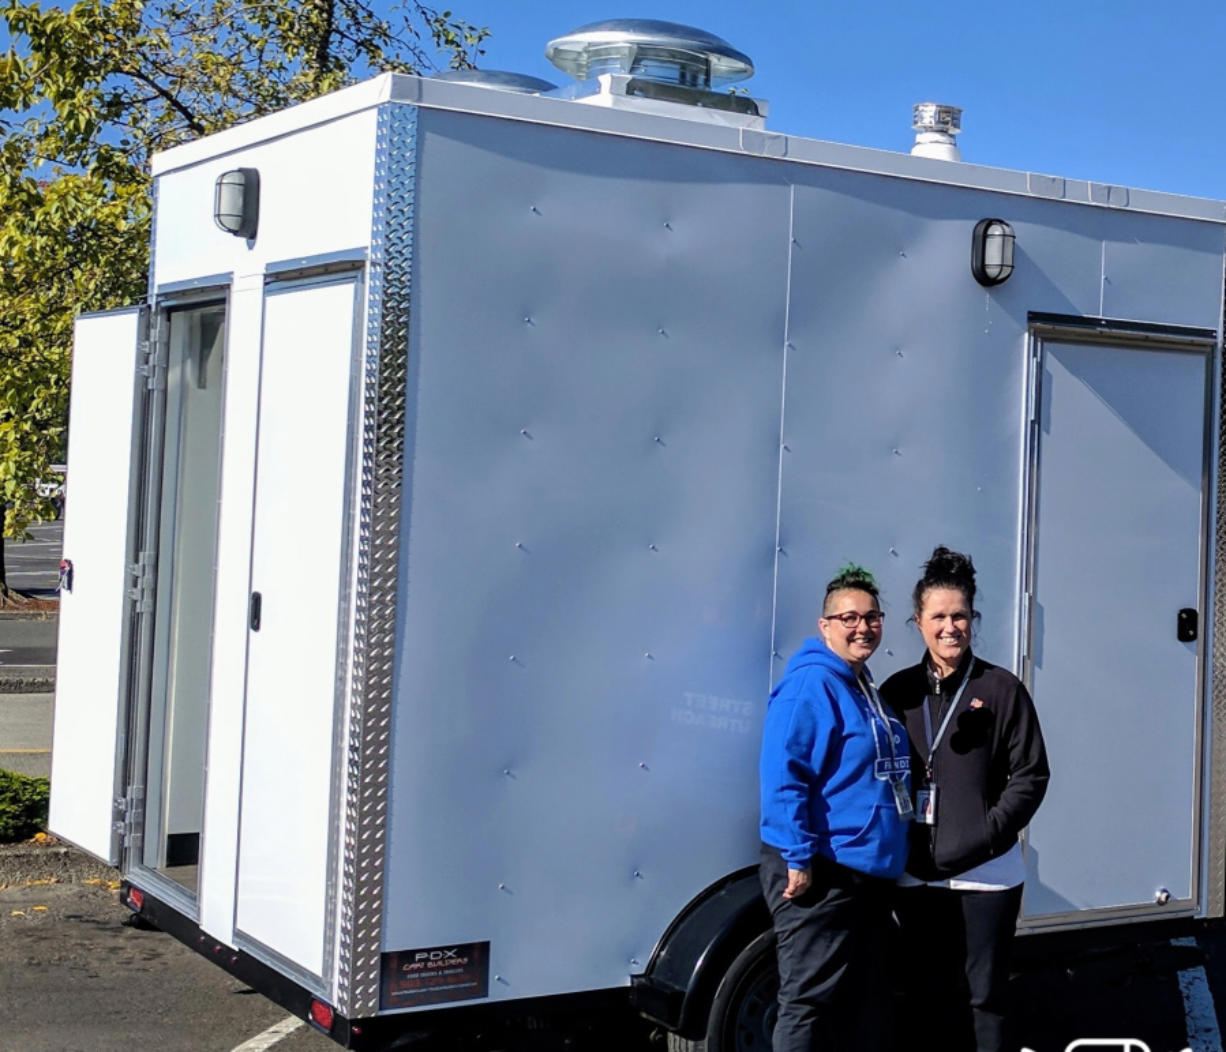 Food with Friends is raising money to operate a shower trailer for homeless people.